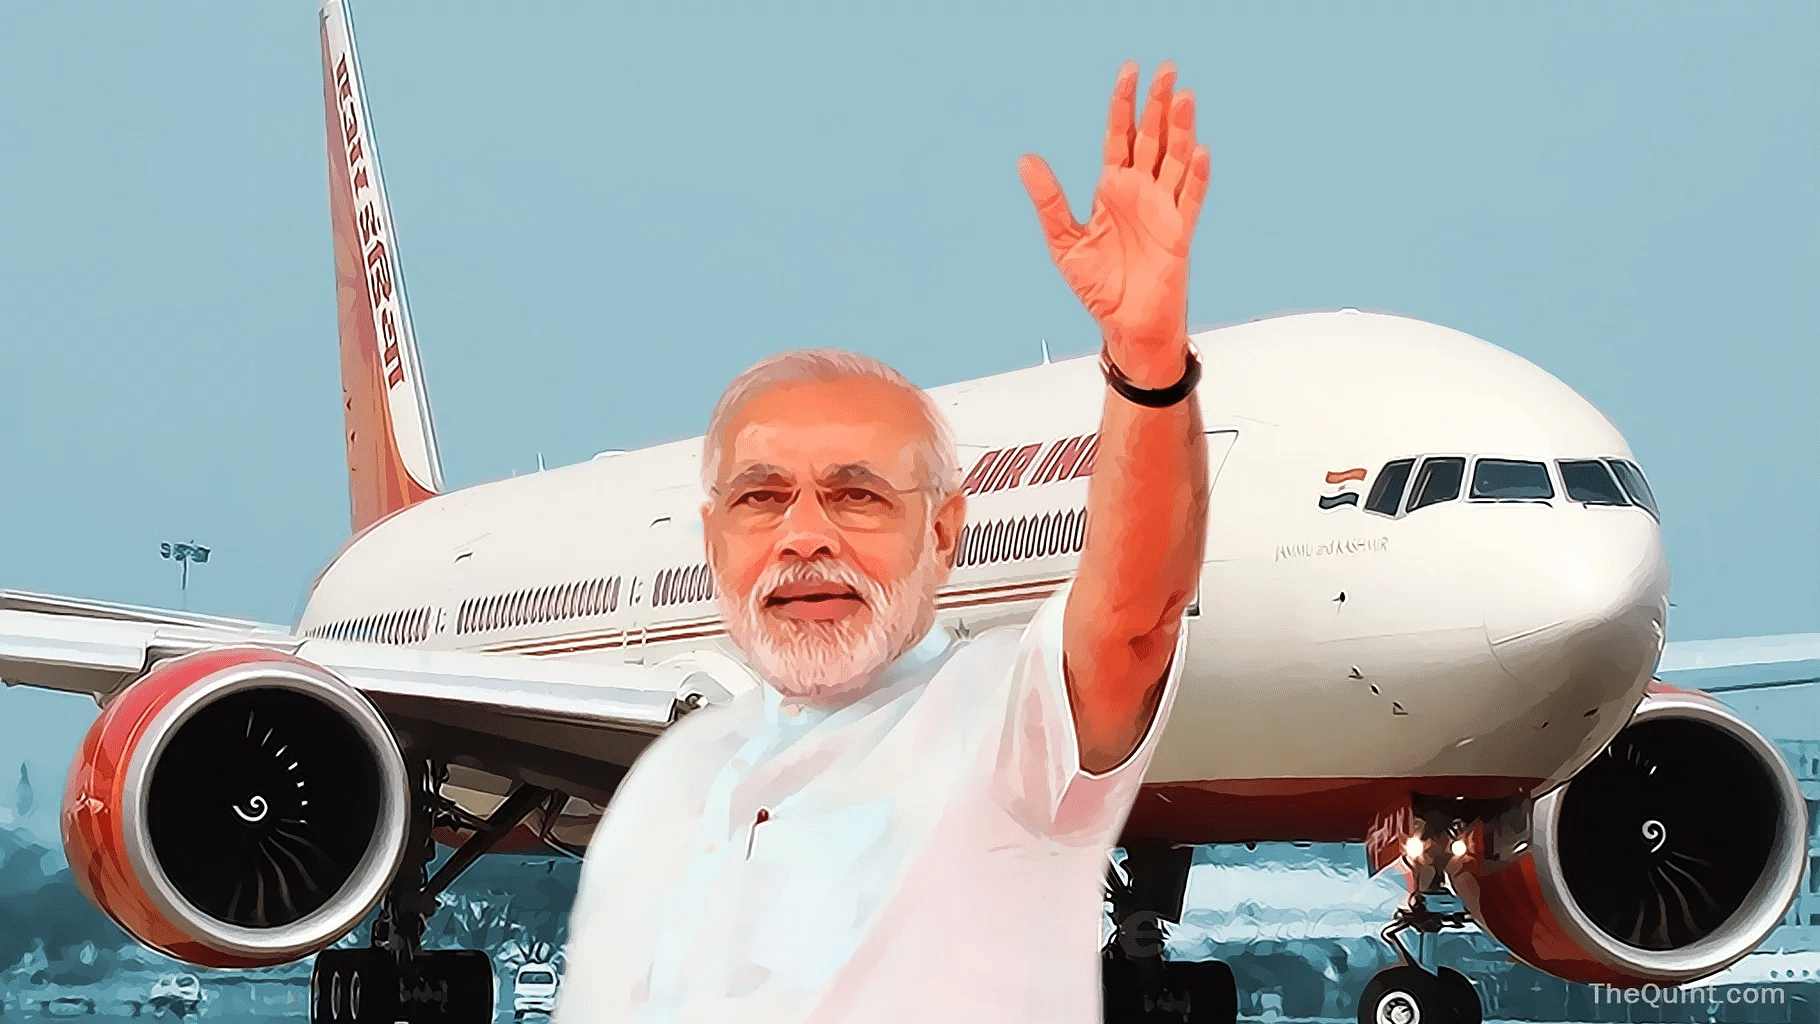 Since 2014, Prime Minister Narendra Modi has visited at least 84 countries.